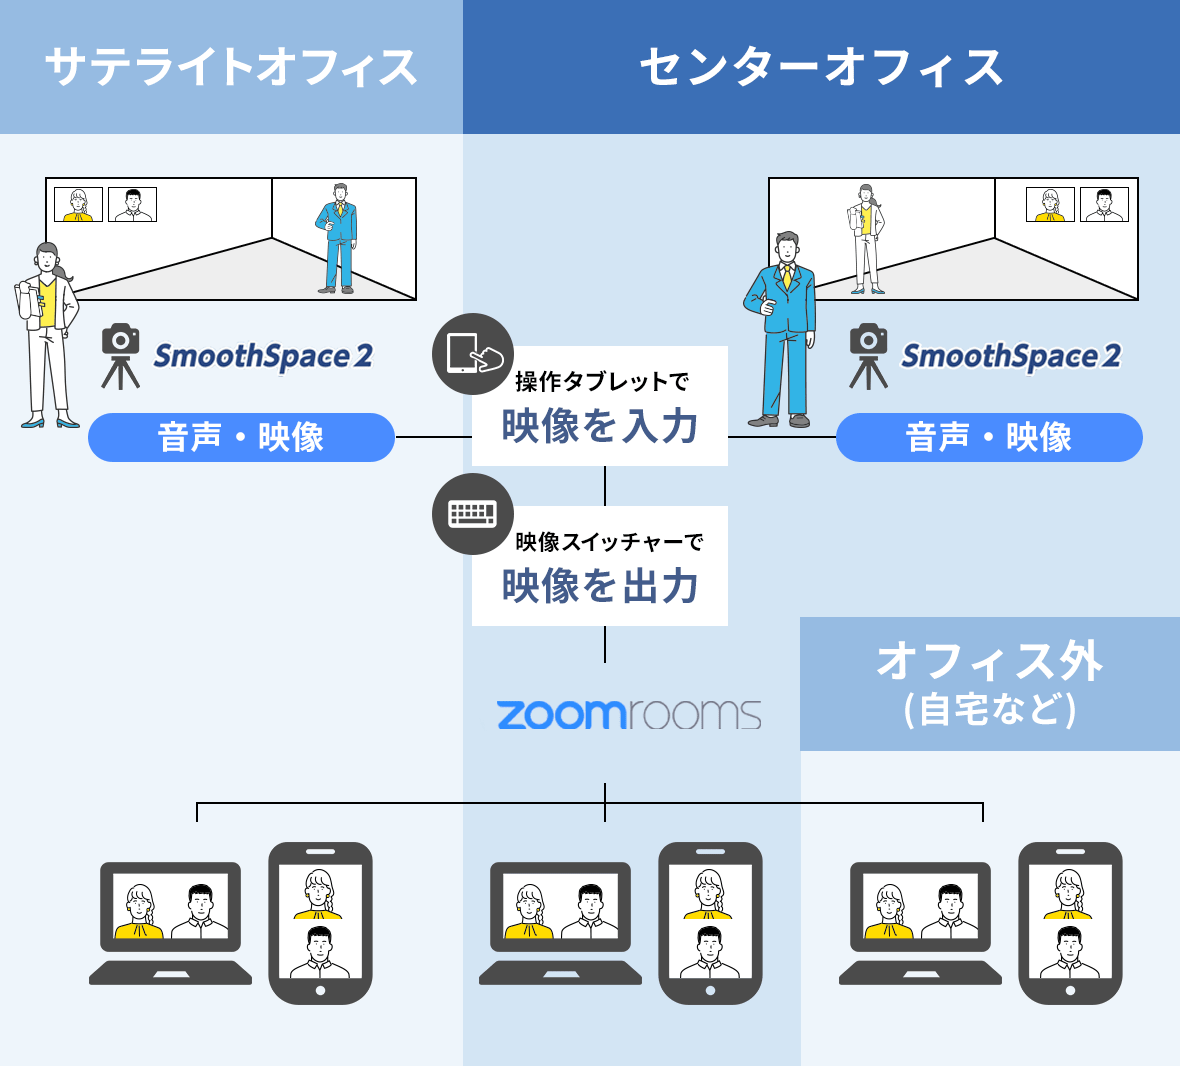 SmoothSpace 2の仕組み